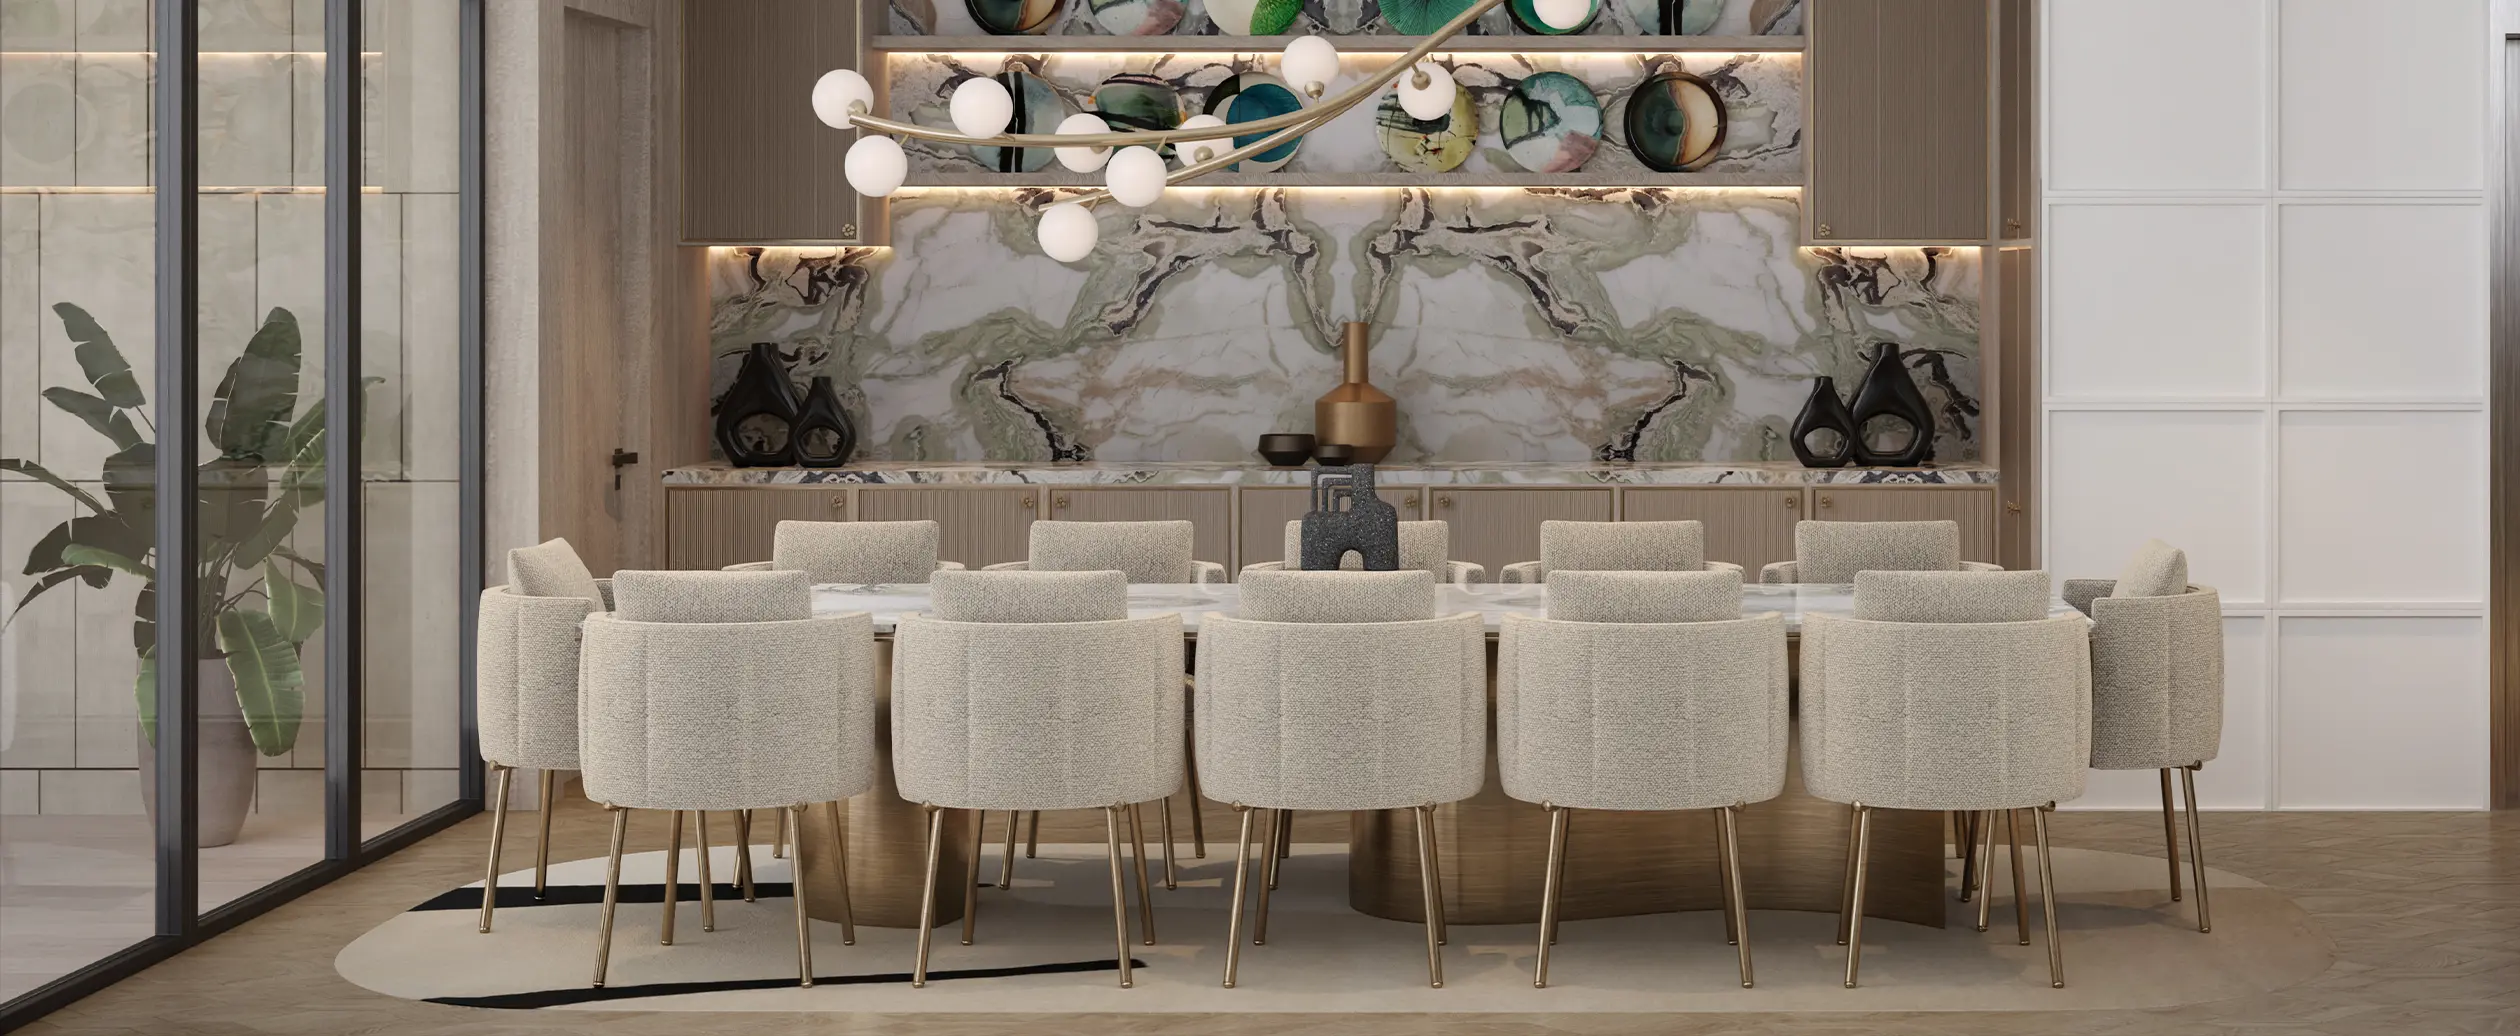 Opulent dining room interior design with a modern artistic chandelier over a round marble table, surrounded by elegant textured chairs, set against a backdrop of a striking marble wall and decorative plates, embodying a luxurious and contemporary dining experience